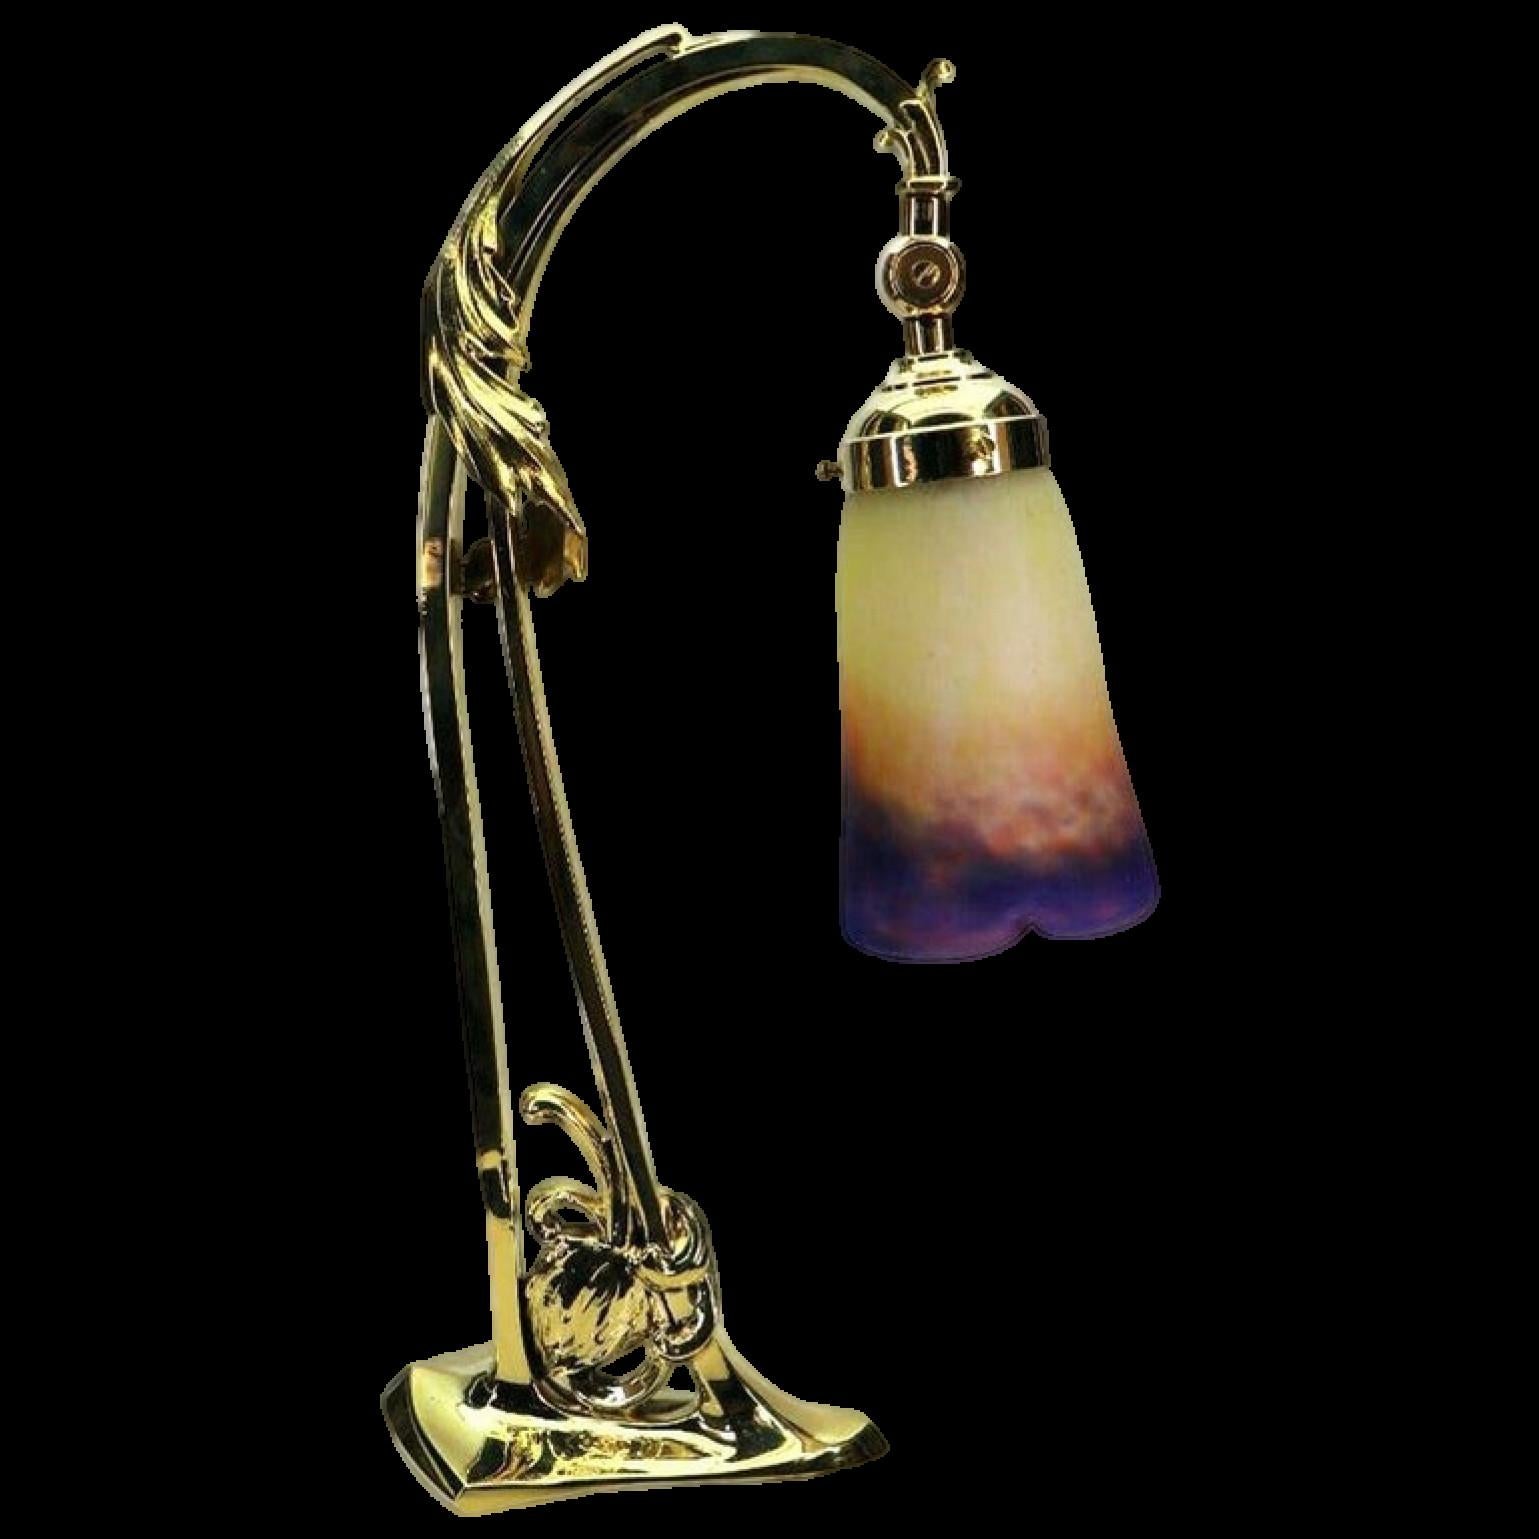 Table lamp made of brass with a floral design, pate de verre glass shade by Muller Freres, Luneville, 1910, blank etching in the upper half, see photo.
The angle of the umbrella can be adjusted.

Measures: Height 46 cm, umbrella height 14.5 cm,